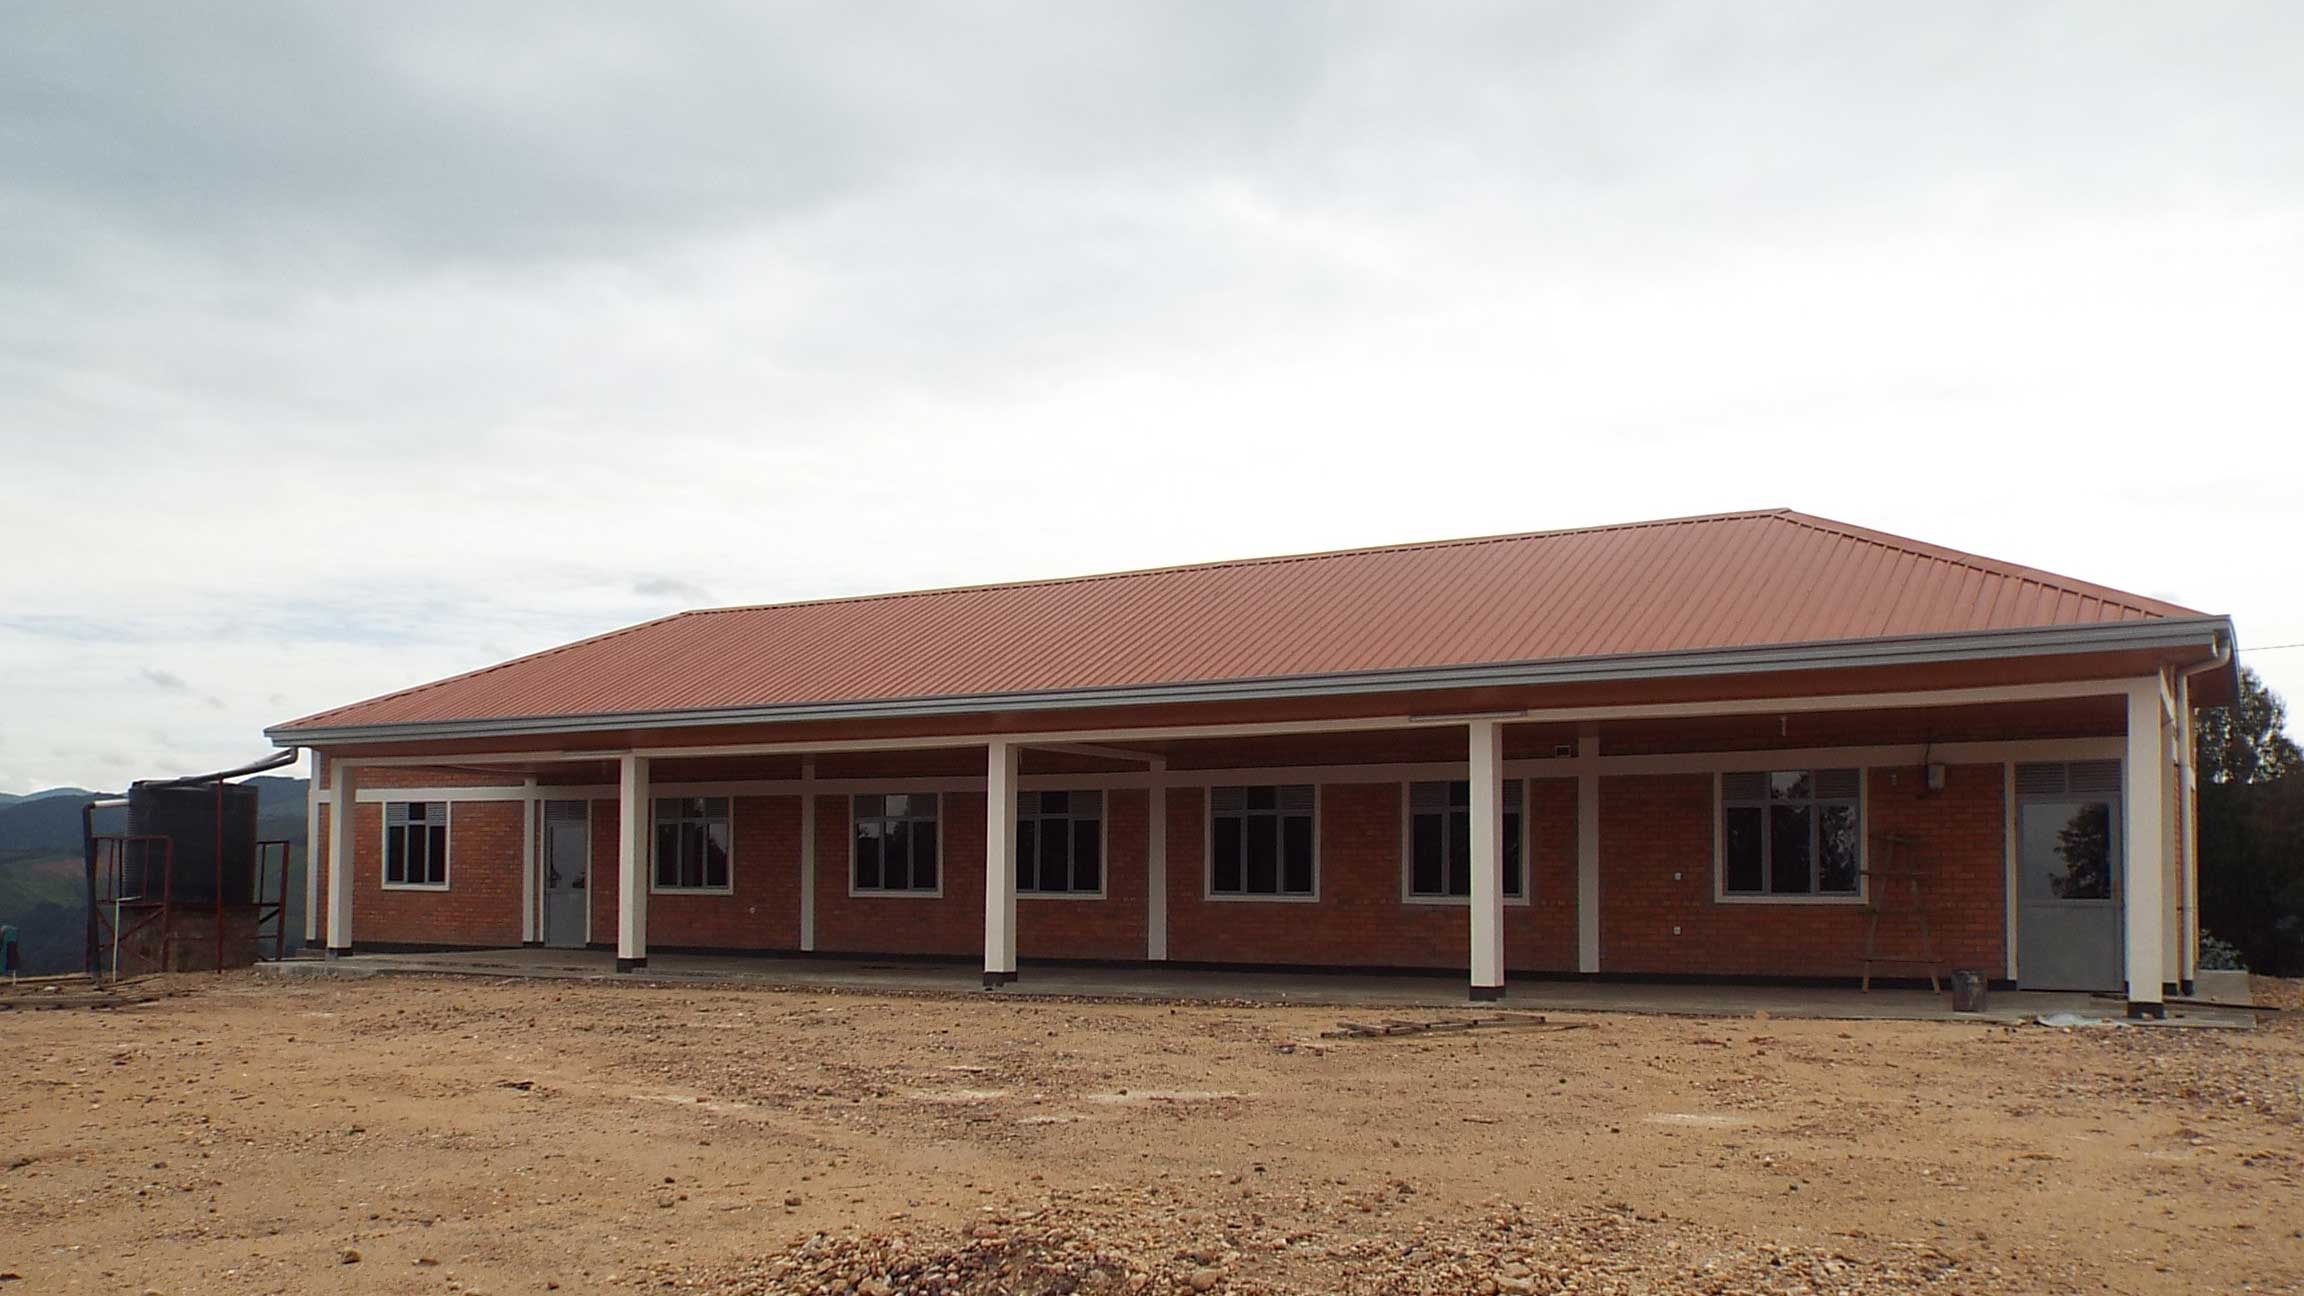 Completion Of The Initial Construction Of The Shinehouse Gishwati Research Station